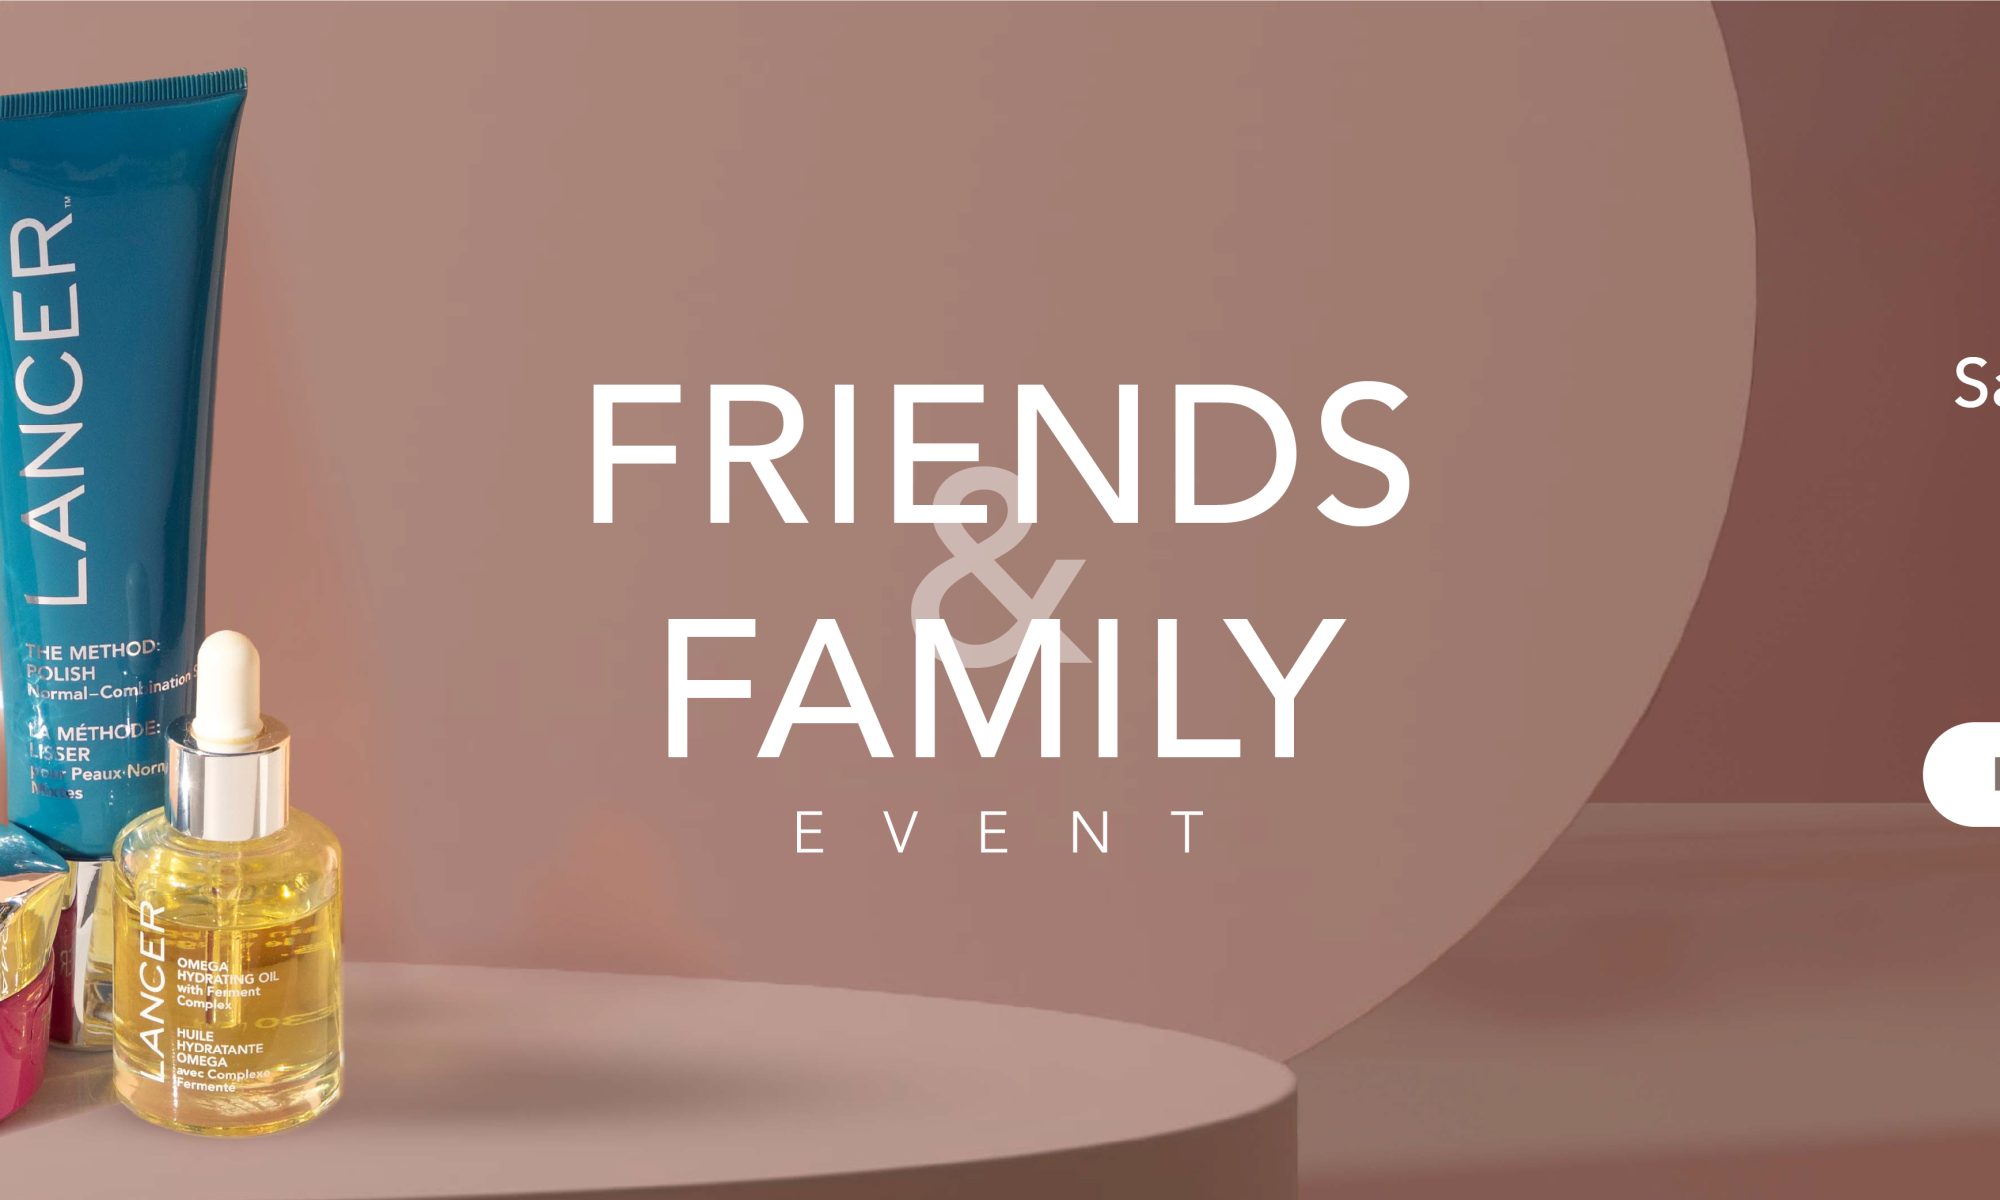 Friends & Family Event is Live!